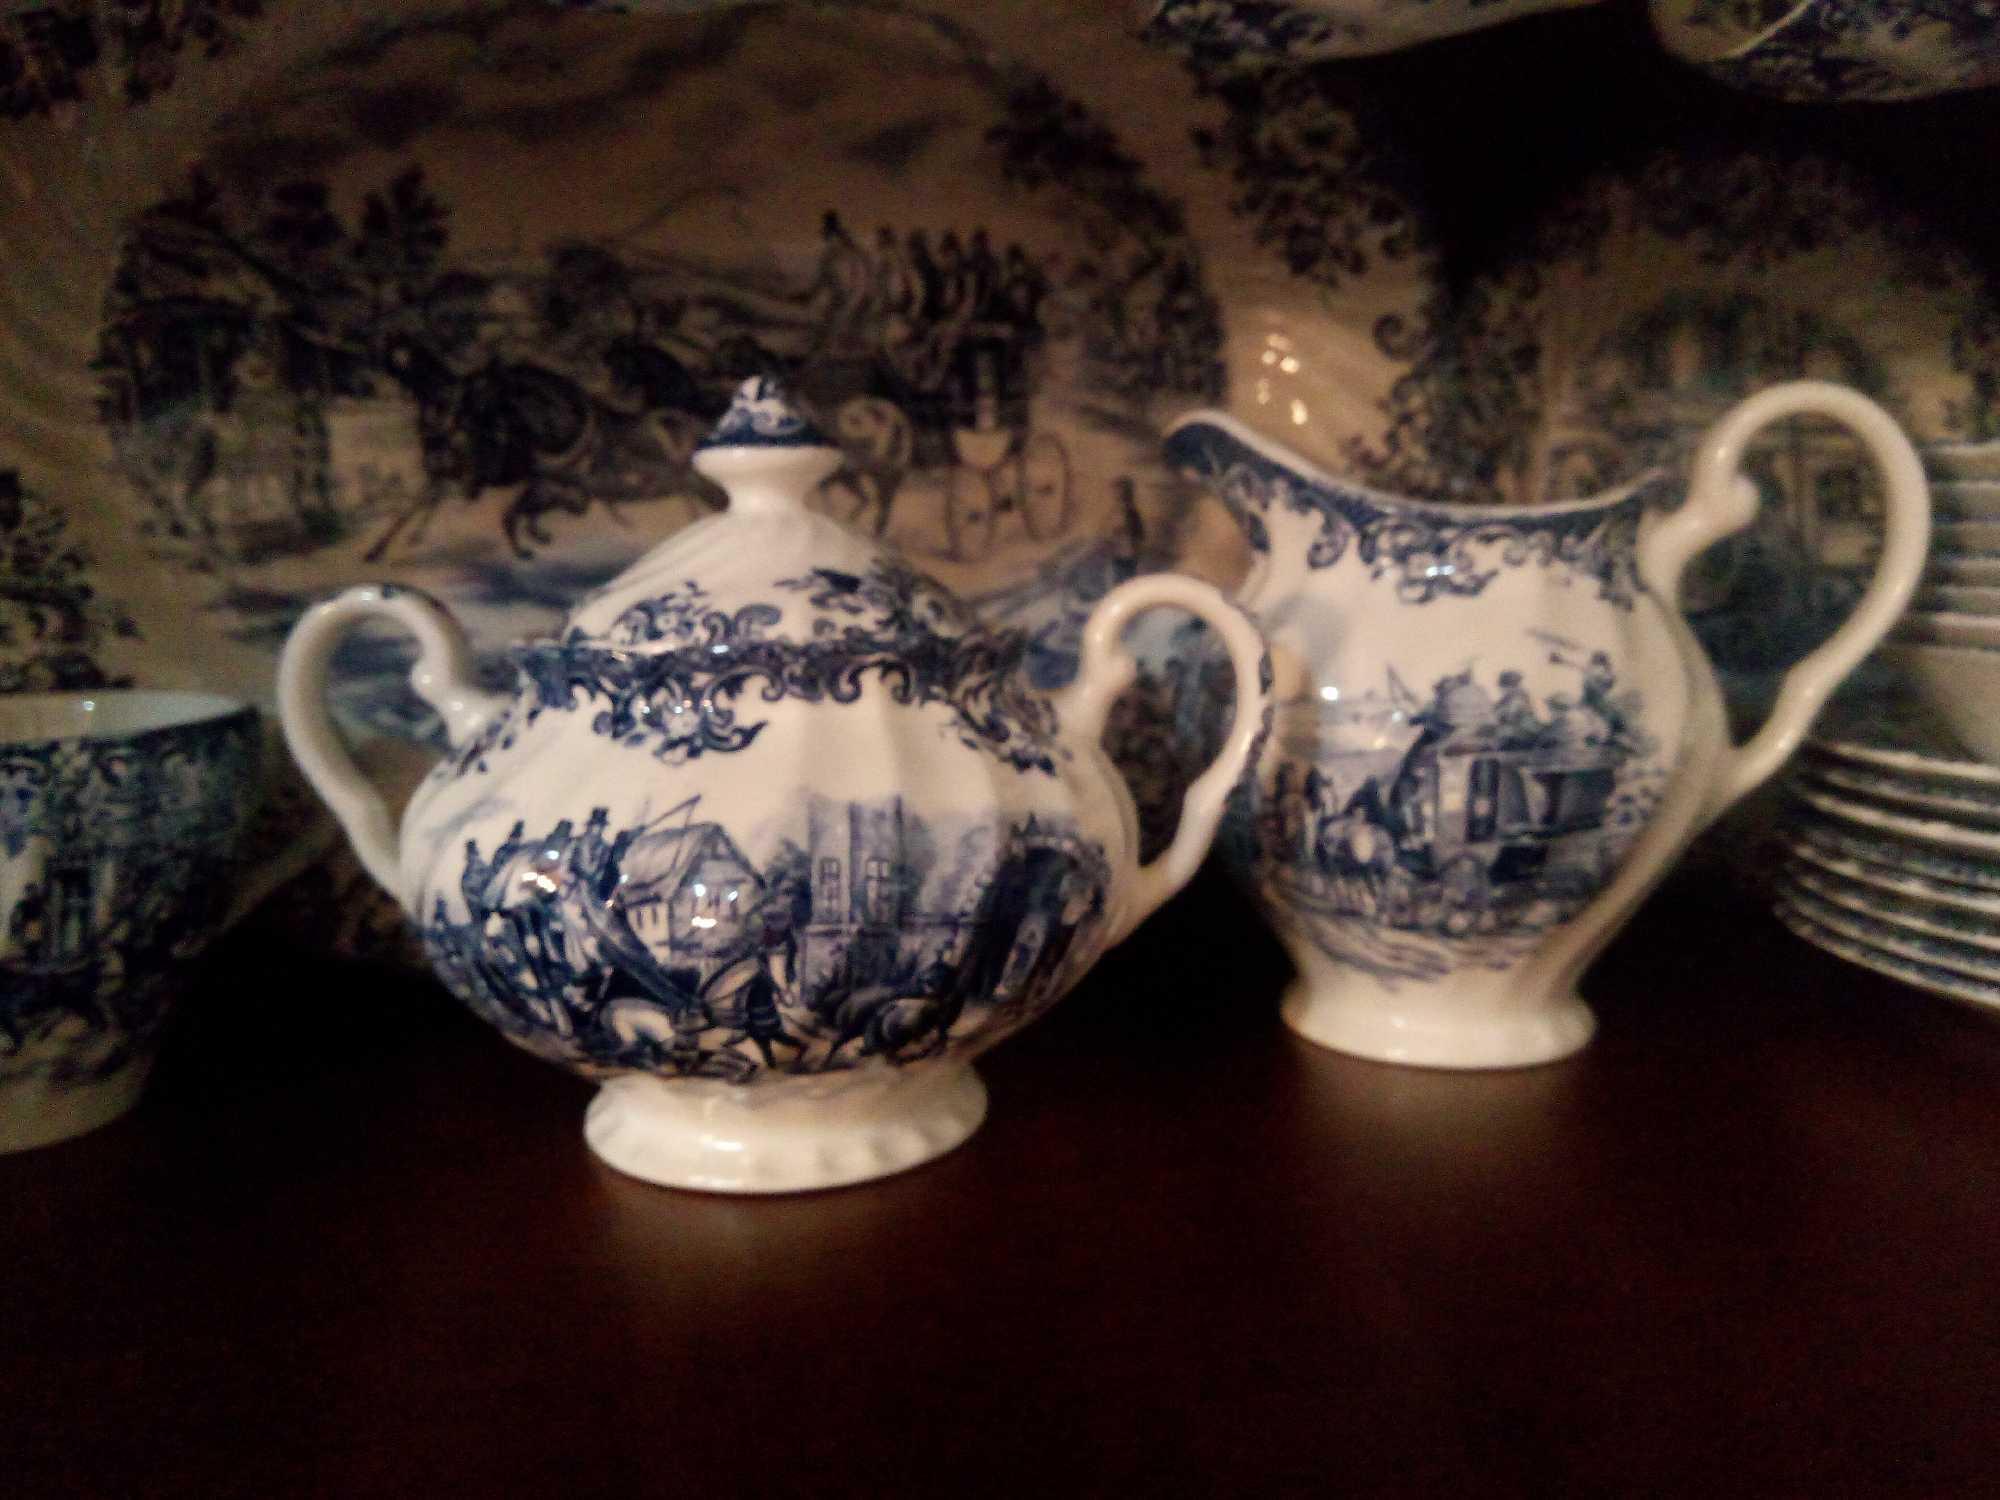 GORGEOUS COACHING SCENES BY JOHNSON BROTHERS IRONSTONE HUNTING COUNTRY CHINA SET